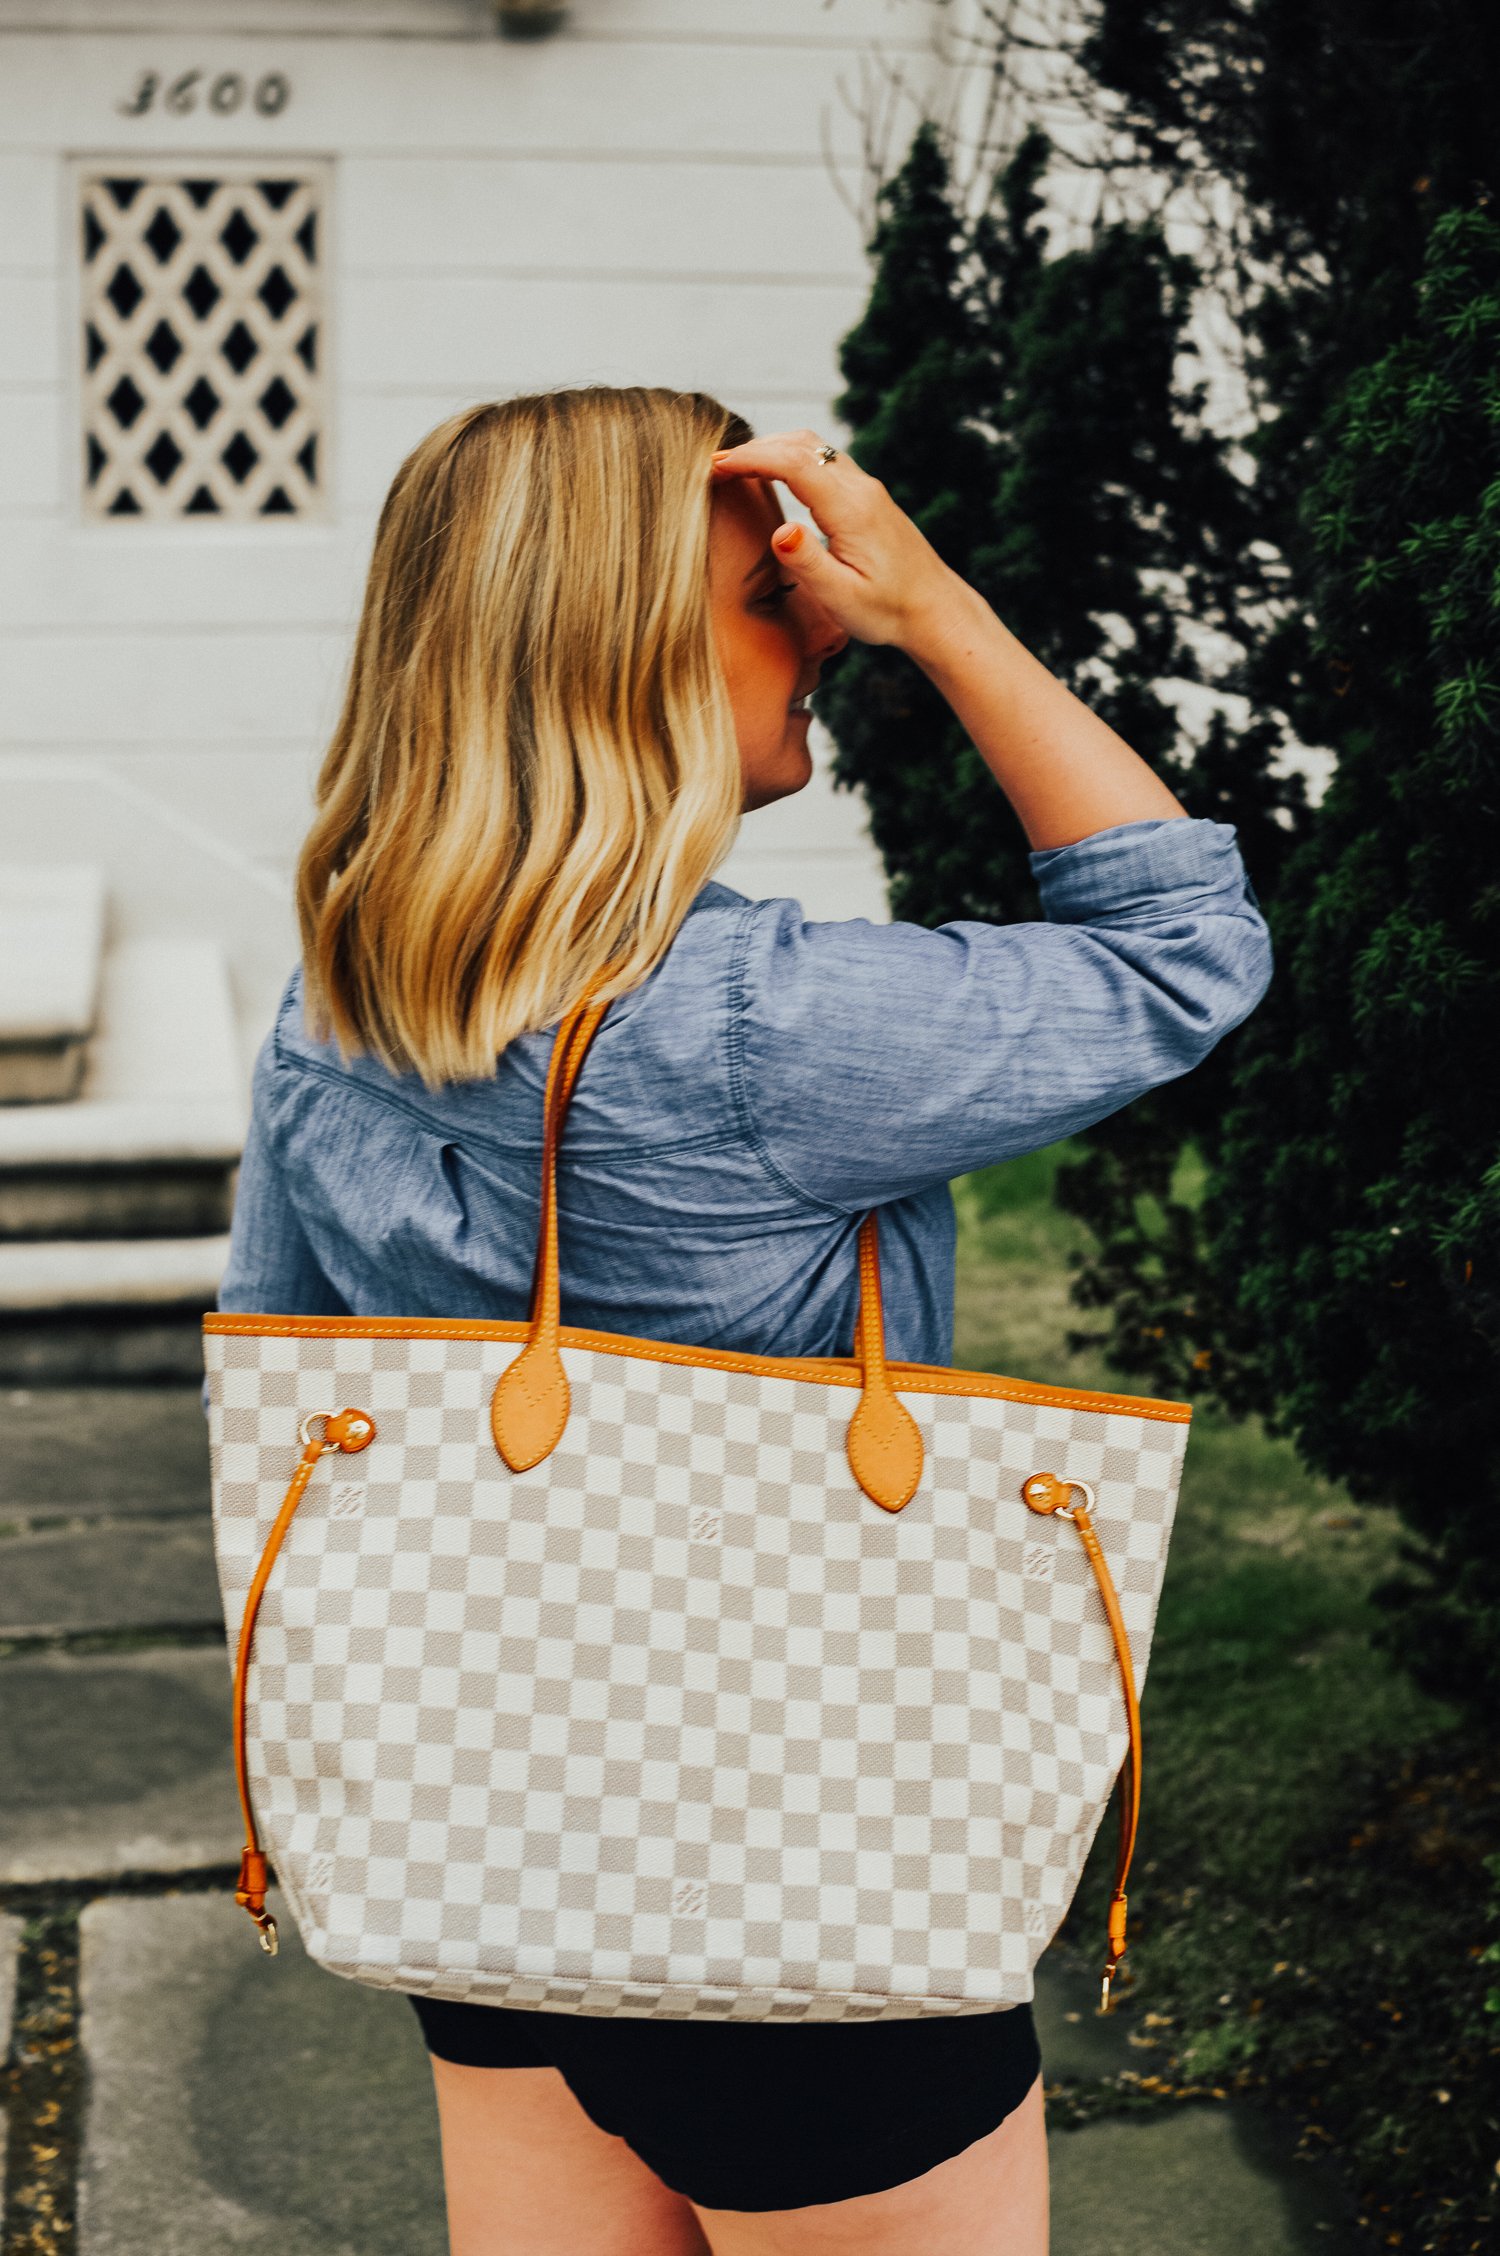 The Best Neverfull Dupes - by Kelsey Boyanzhu